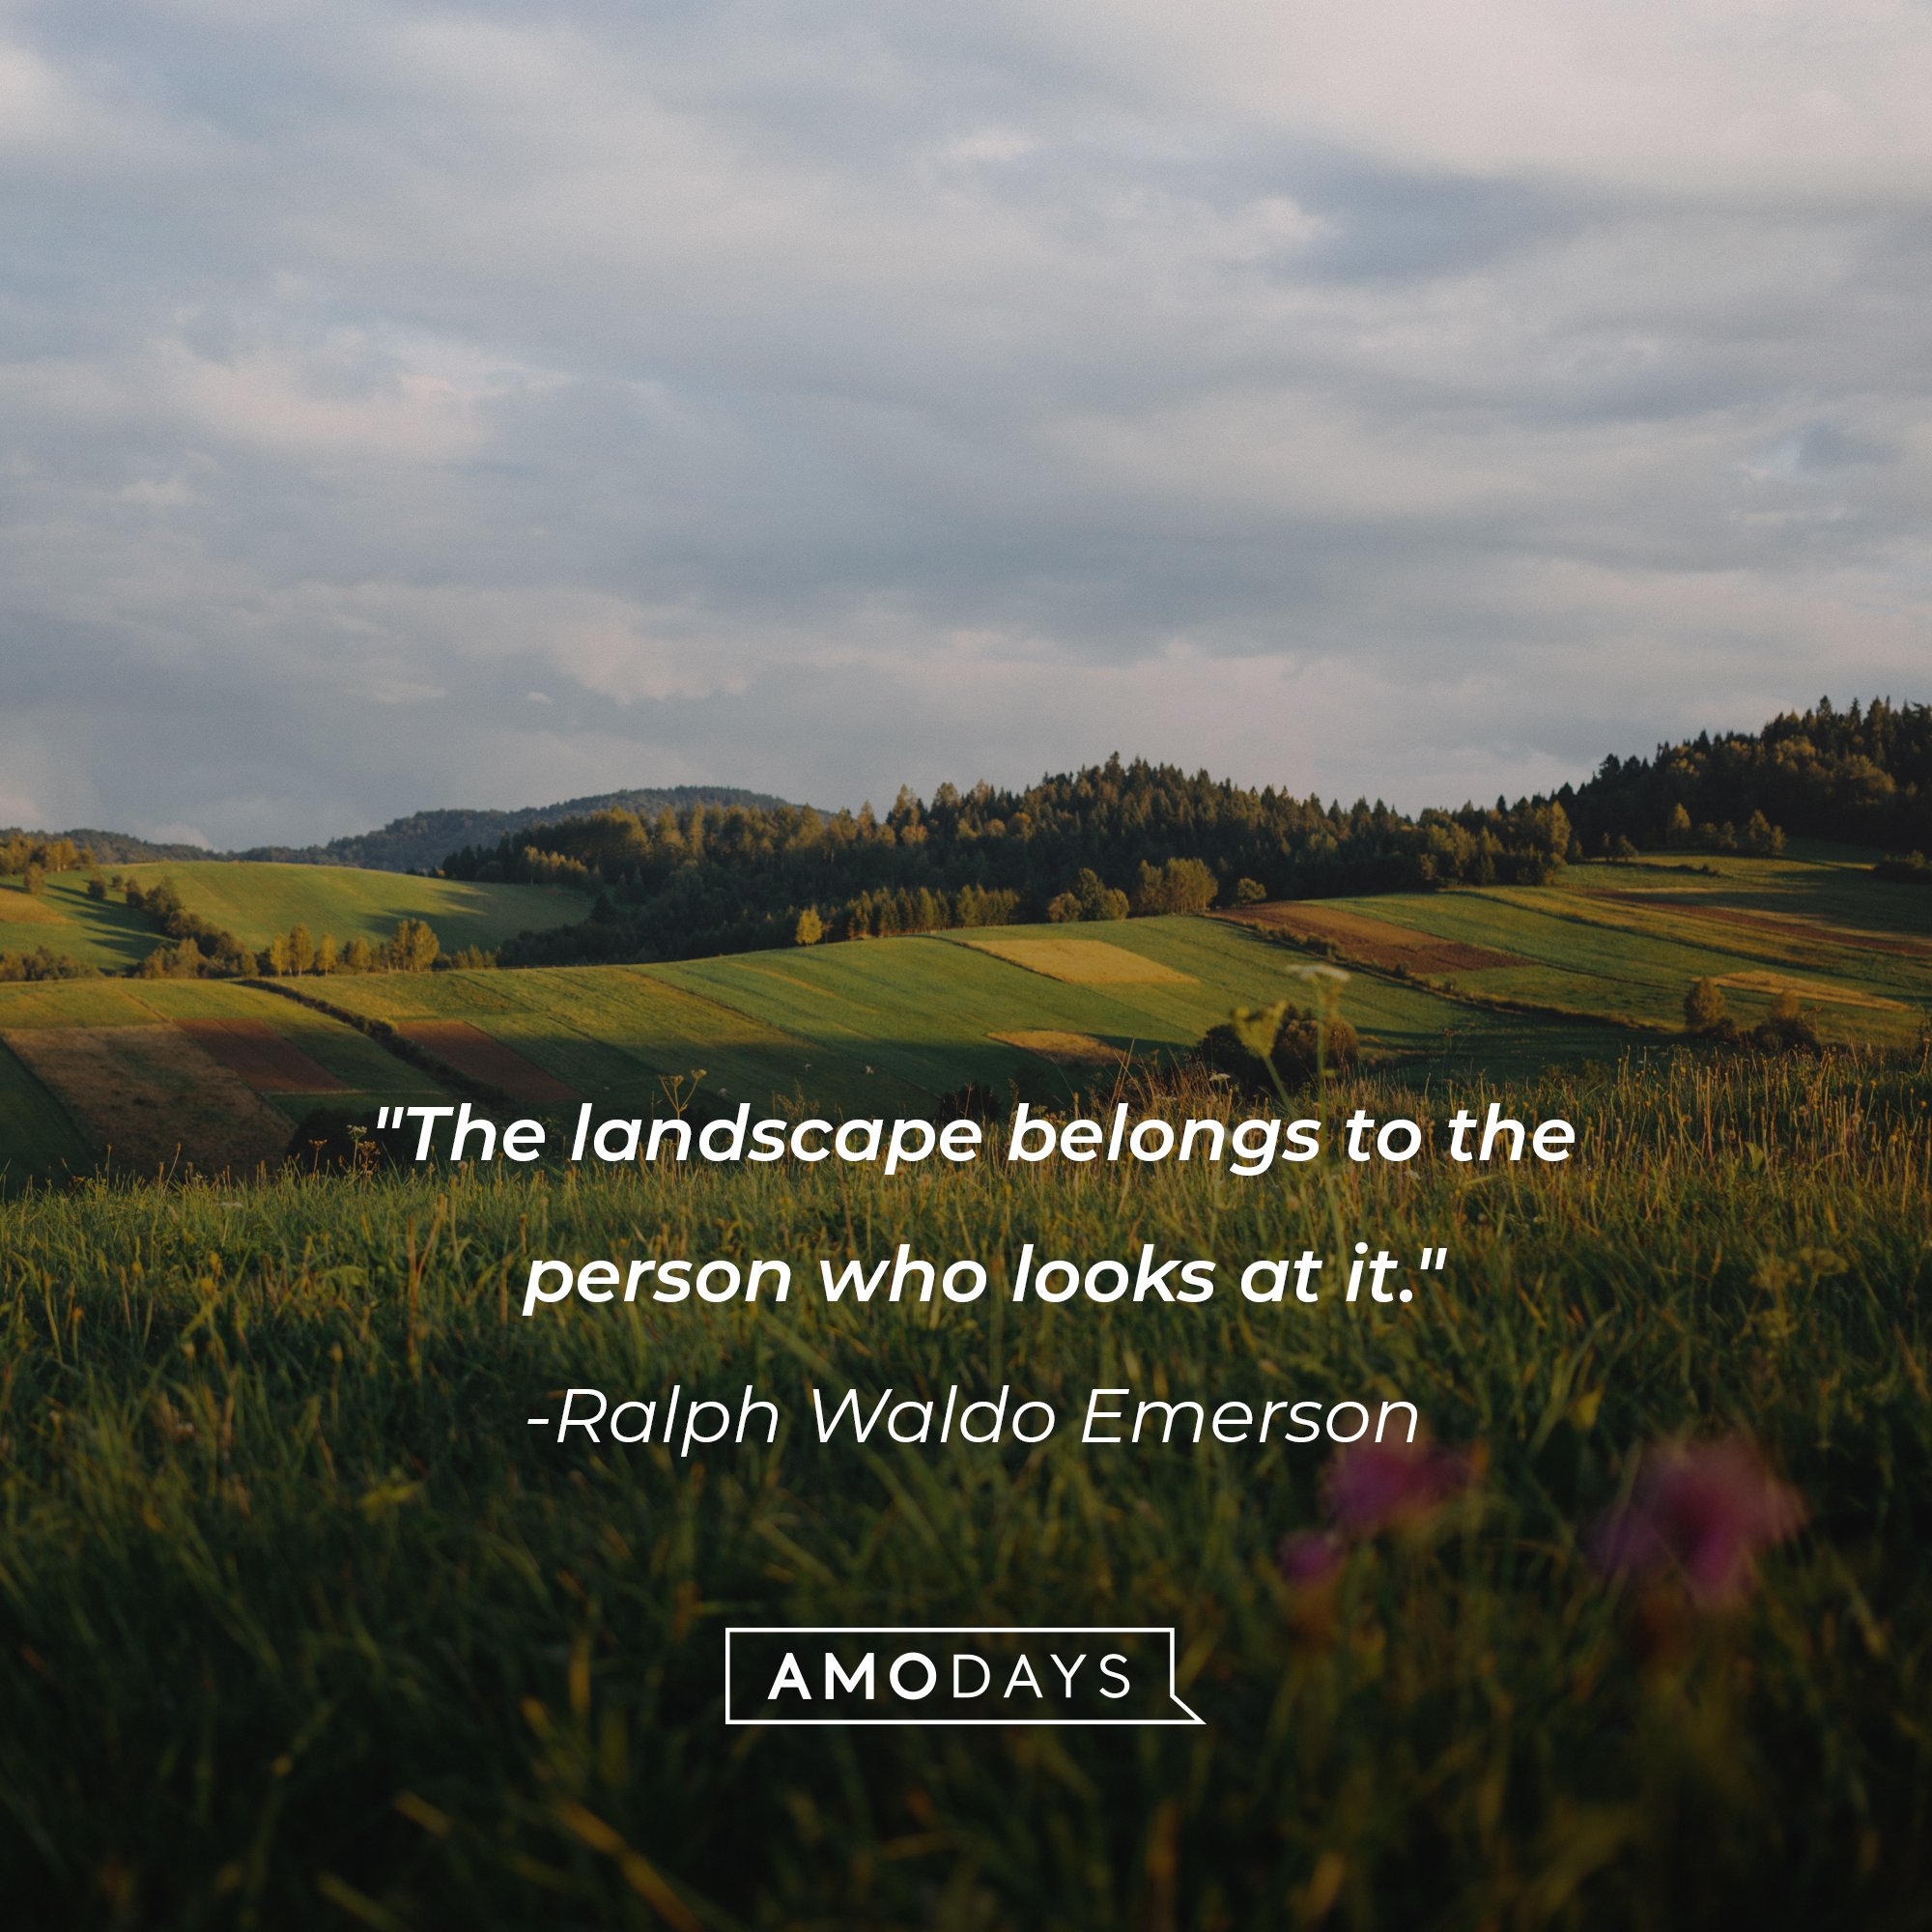 Ralph Waldo Emerson's quote: "The landscape belongs to the person who looks at it." | Image: AmoDays